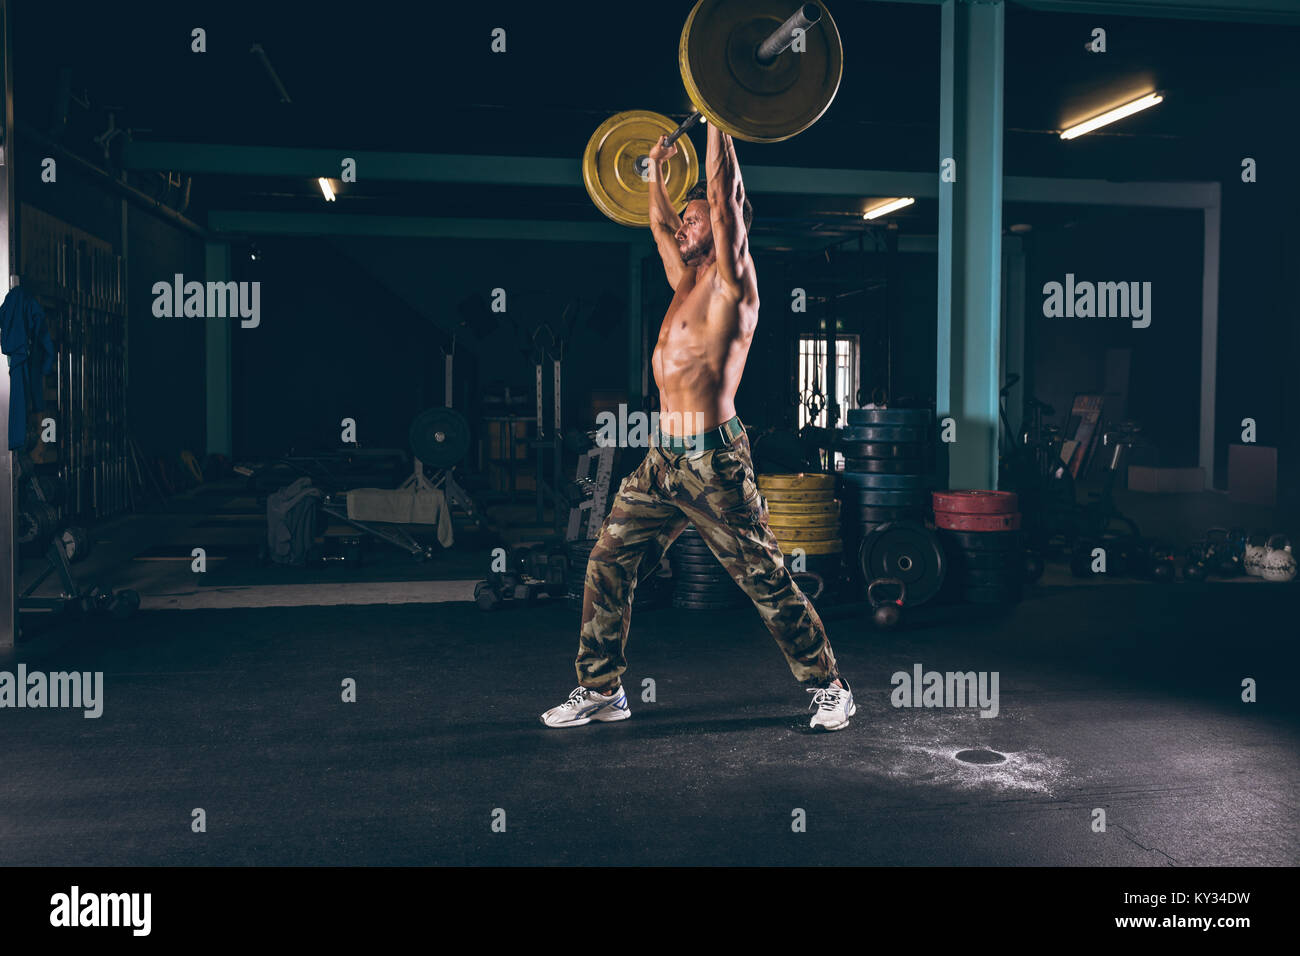 Muscular man exercising with barbell Stock Photo